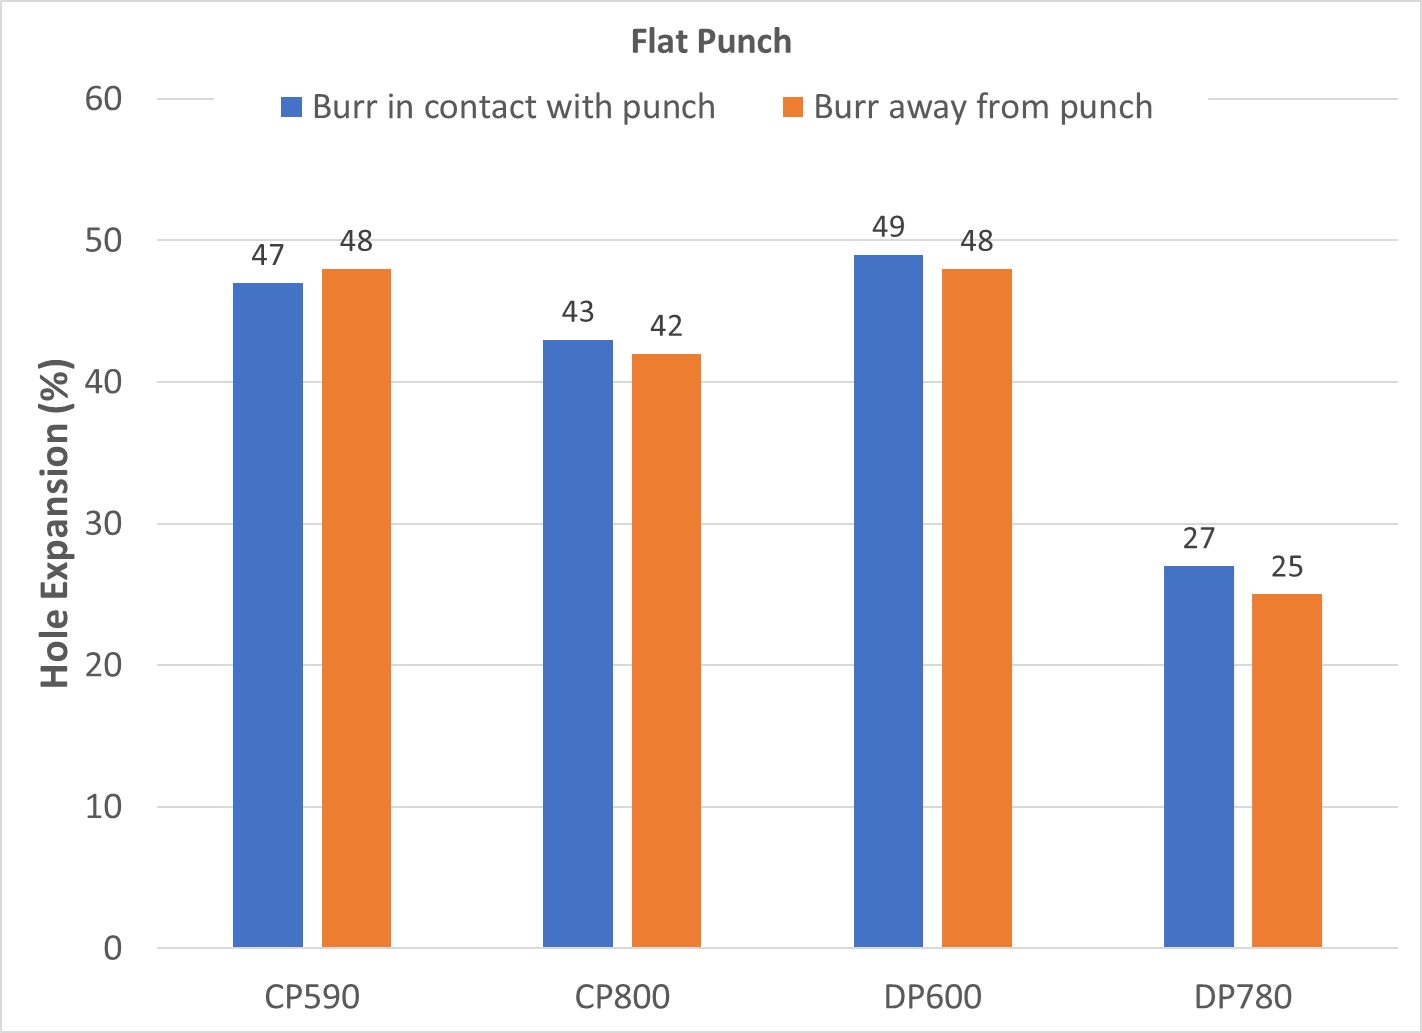 Figure 13: Effect of Burr Orientation on Hole Expansion from a Flat Punch [Based on Data from Reference 11]